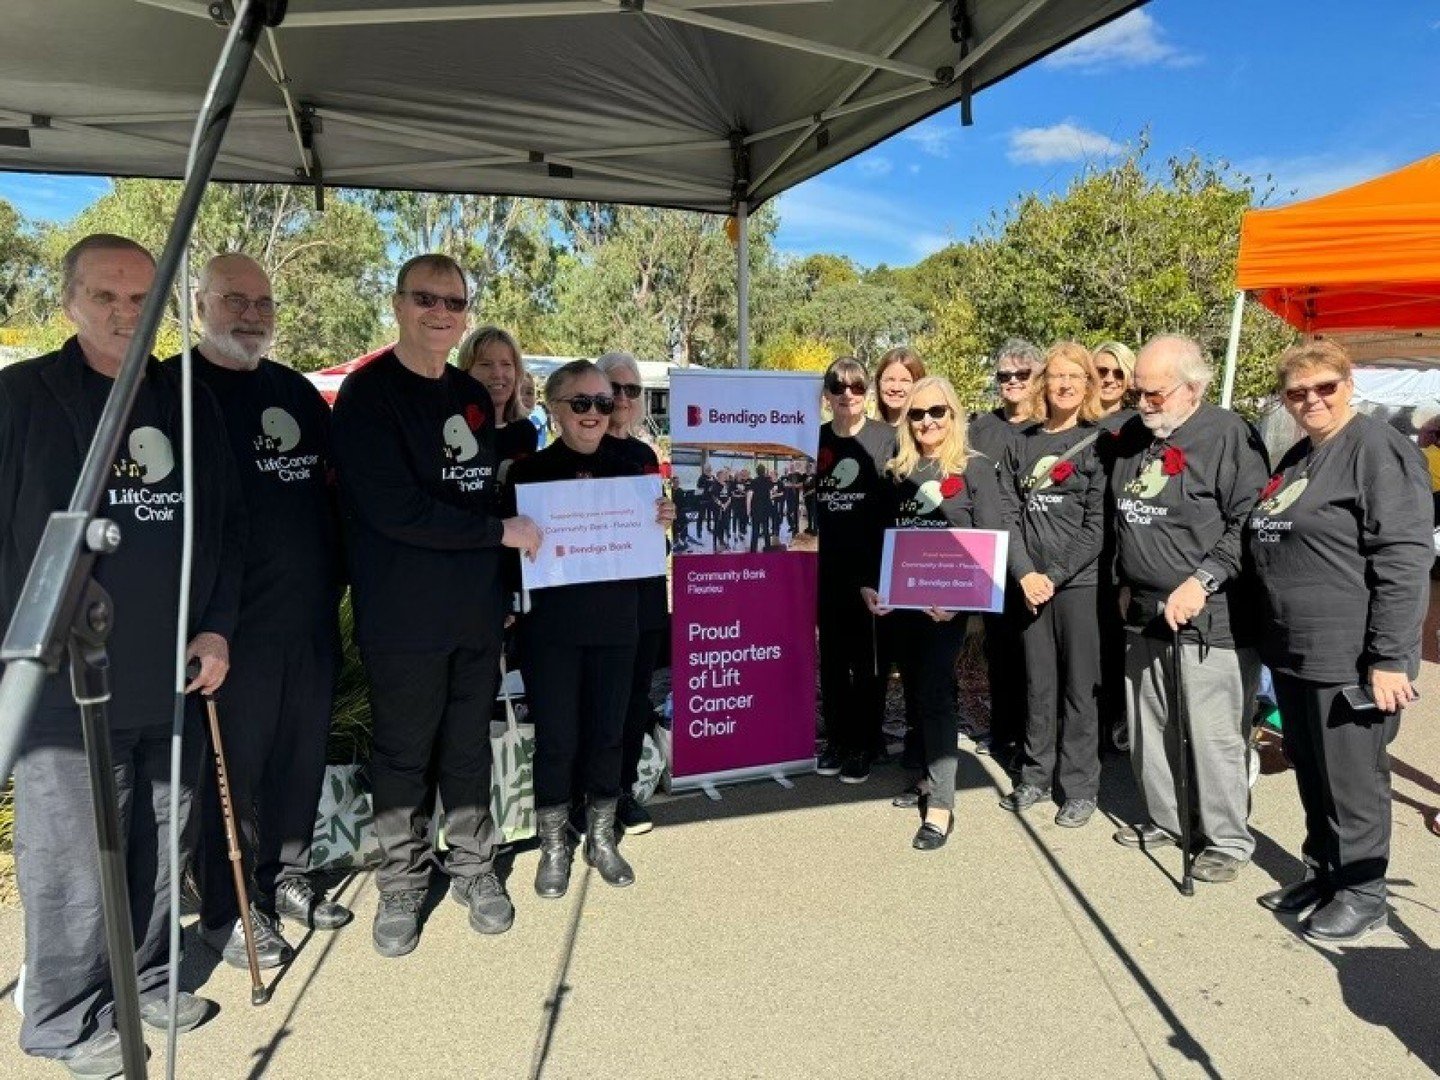 On the weekend, the Lift Choir performed at the Willunga Market.

This was the third year the choir has sung there around Anzac Day, and following their performance, the choir enjoyed lunch and a friendly catch up.

We love hearing about the success 